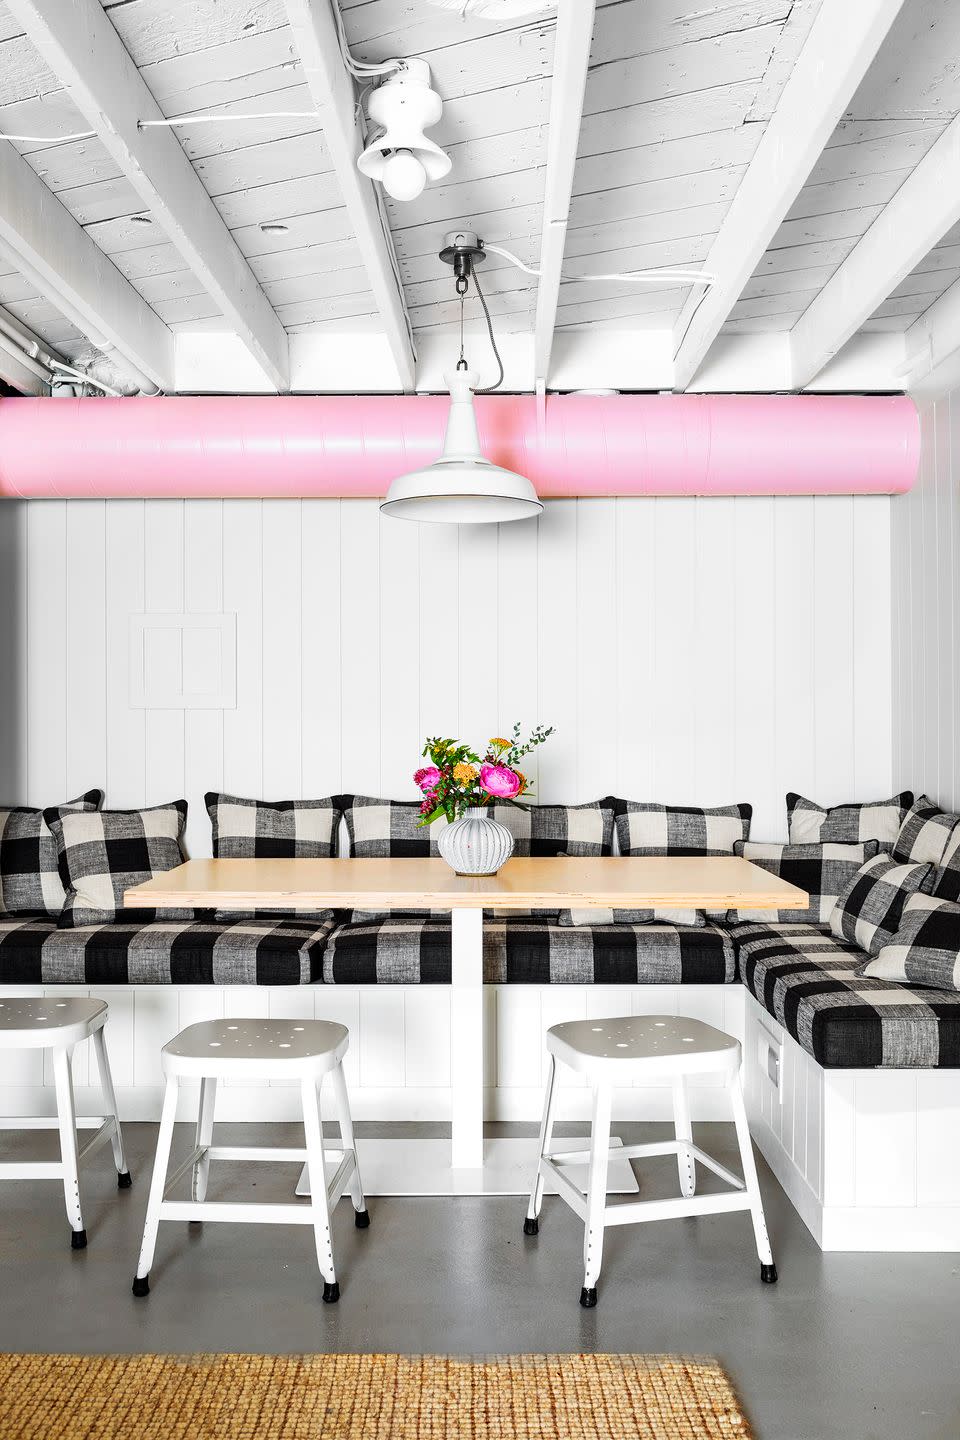 <p>Not technically the ceiling, but close it, painting an HVAC duct can truly transform an eyesore into style statement. "In this basement remodel, we would've had to spend a ton of money rerouting the HVAC air duct." designer Max Humphrey says. "Who wouldn't go with ballet slipper pink instead?" </p>